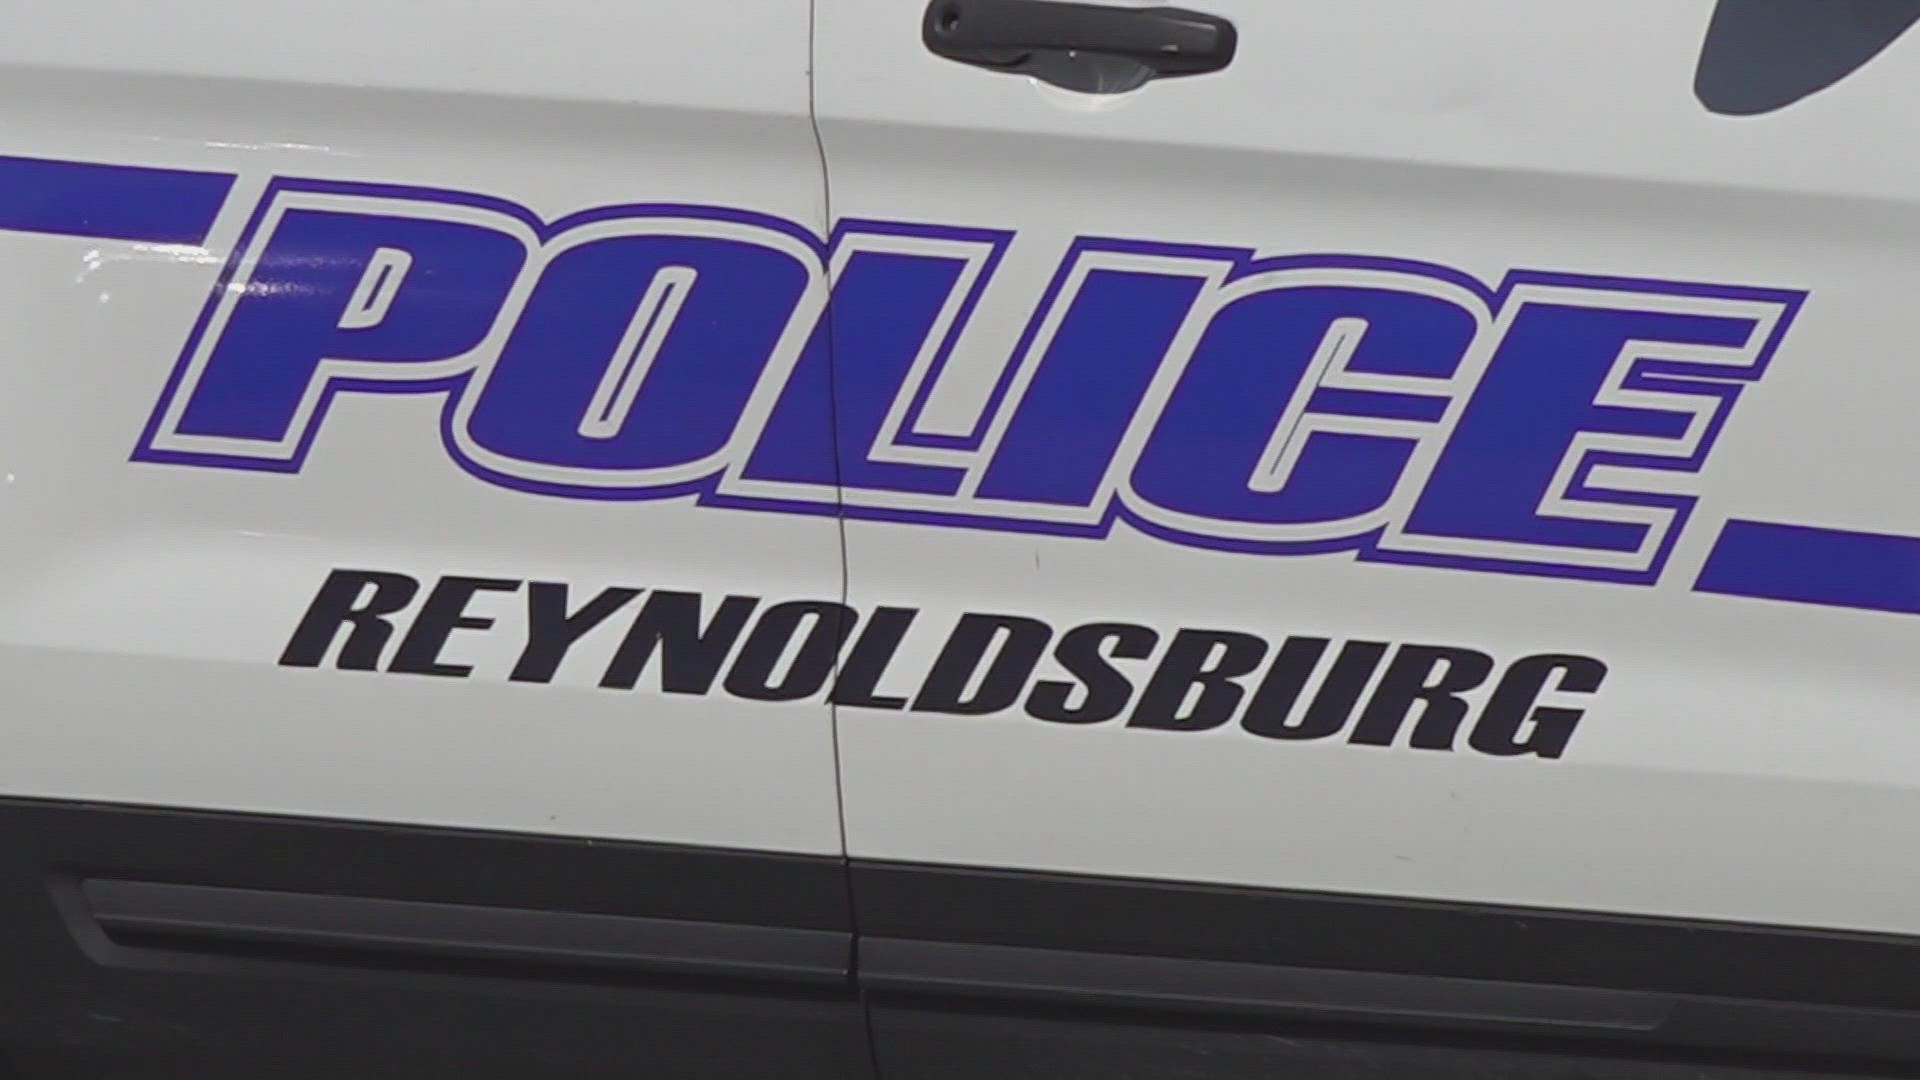 Reynoldsburg Mayor Joe Begeny says findings from a recent department-wide survey will help navigate the police department in a positive direction.